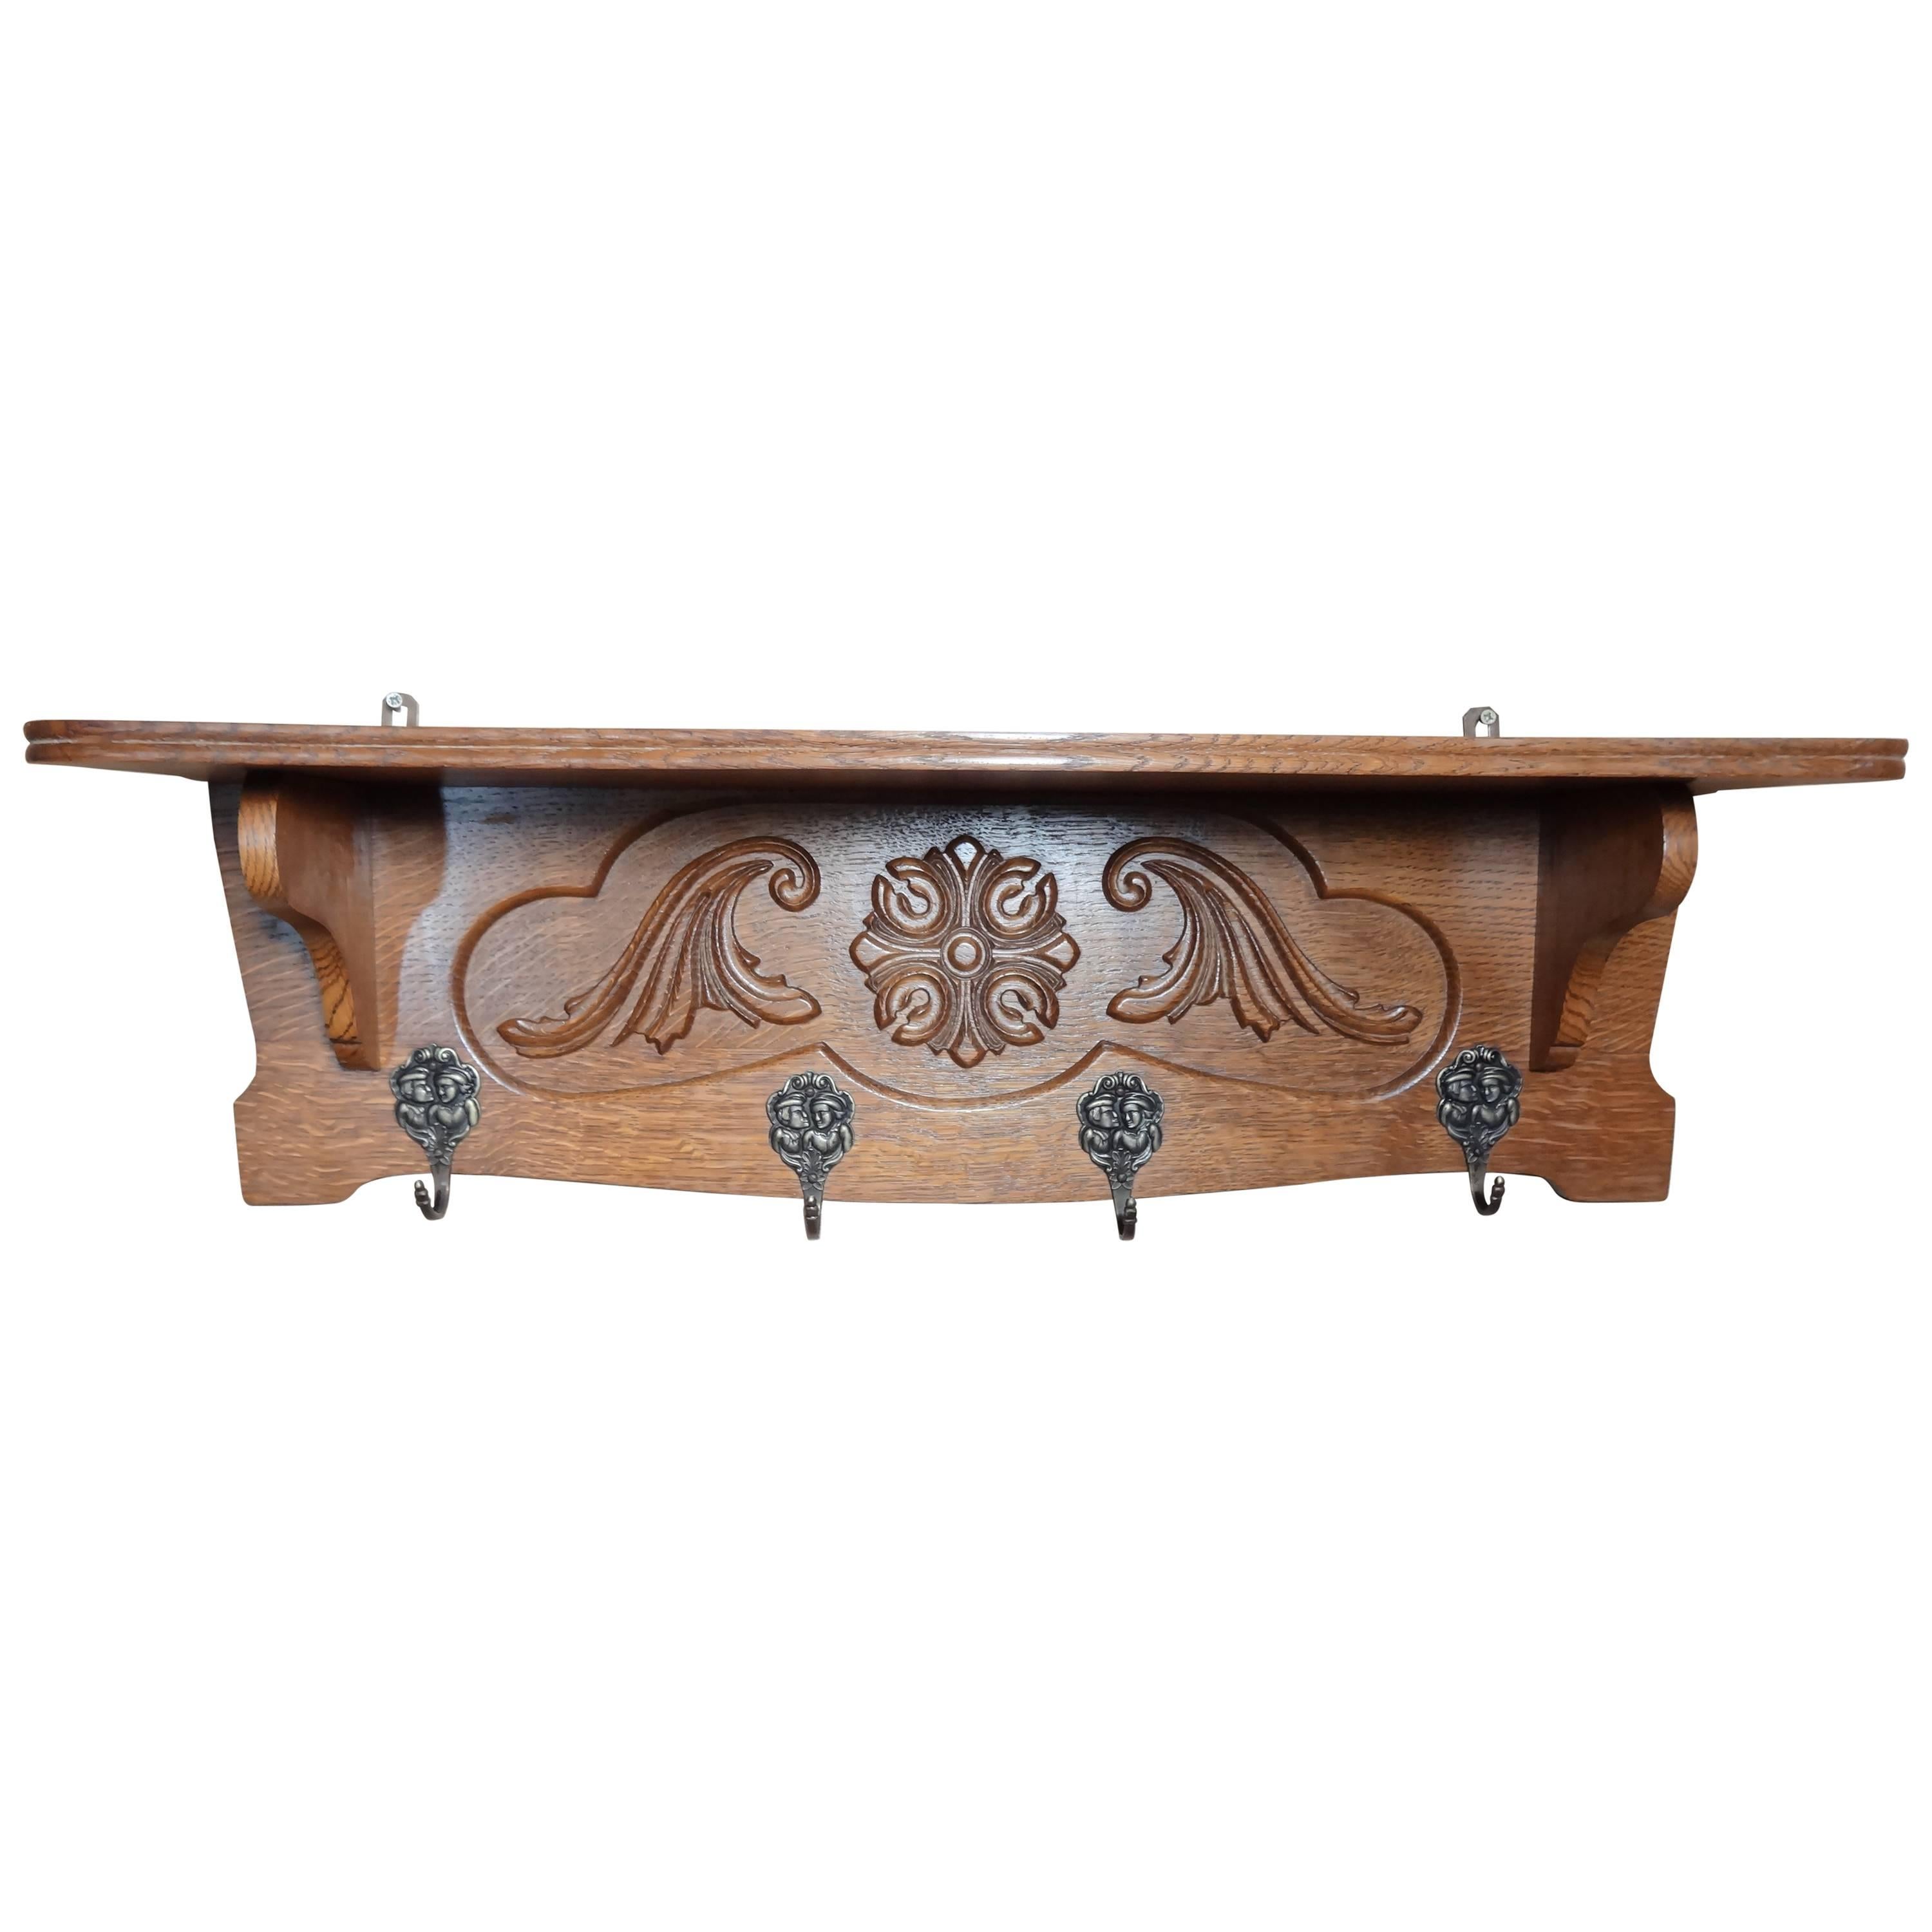 Dutch solid oak  Art & Craft Coatrack ca 1930 with some lovely wood carving